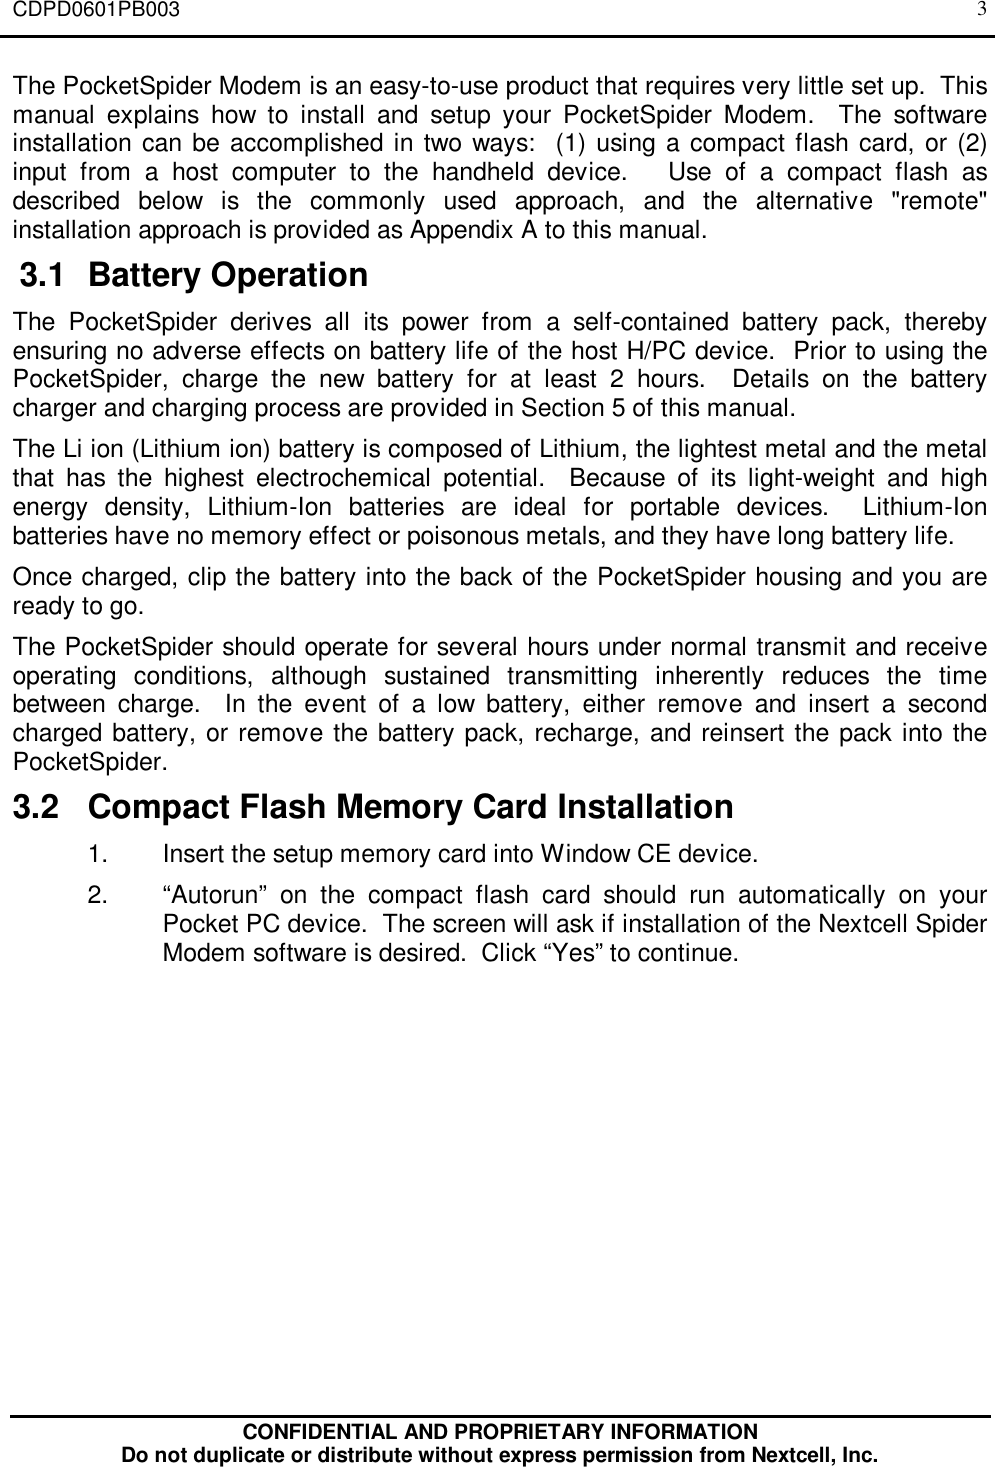 CDPD0601PB003CONFIDENTIAL AND PROPRIETARY INFORMATIONDo not duplicate or distribute without express permission from Nextcell, Inc.3The PocketSpider Modem is an easy-to-use product that requires very little set up.  Thismanual explains how to install and setup your PocketSpider Modem.  The softwareinstallation can be accomplished in two ways:  (1) using a compact flash card, or (2)input from a host computer to the handheld device.   Use of a compact flash asdescribed below is the commonly used approach, and the alternative &quot;remote&quot;installation approach is provided as Appendix A to this manual. 3.1 Battery OperationThe PocketSpider derives all its power from a self-contained battery pack, therebyensuring no adverse effects on battery life of the host H/PC device.  Prior to using thePocketSpider, charge the new battery for at least 2 hours.  Details on the batterycharger and charging process are provided in Section 5 of this manual.The Li ion (Lithium ion) battery is composed of Lithium, the lightest metal and the metalthat has the highest electrochemical potential.  Because of its light-weight and highenergy density, Lithium-Ion batteries are ideal for portable devices.  Lithium-Ionbatteries have no memory effect or poisonous metals, and they have long battery life.Once charged, clip the battery into the back of the PocketSpider housing and you areready to go.The PocketSpider should operate for several hours under normal transmit and receiveoperating conditions, although sustained transmitting inherently reduces the timebetween charge.  In the event of a low battery, either remove and insert a secondcharged battery, or remove the battery pack, recharge, and reinsert the pack into thePocketSpider.3.2 Compact Flash Memory Card Installation1. Insert the setup memory card into Window CE device.2. “Autorun” on the compact flash card should run automatically on yourPocket PC device.  The screen will ask if installation of the Nextcell SpiderModem software is desired.  Click “Yes” to continue.